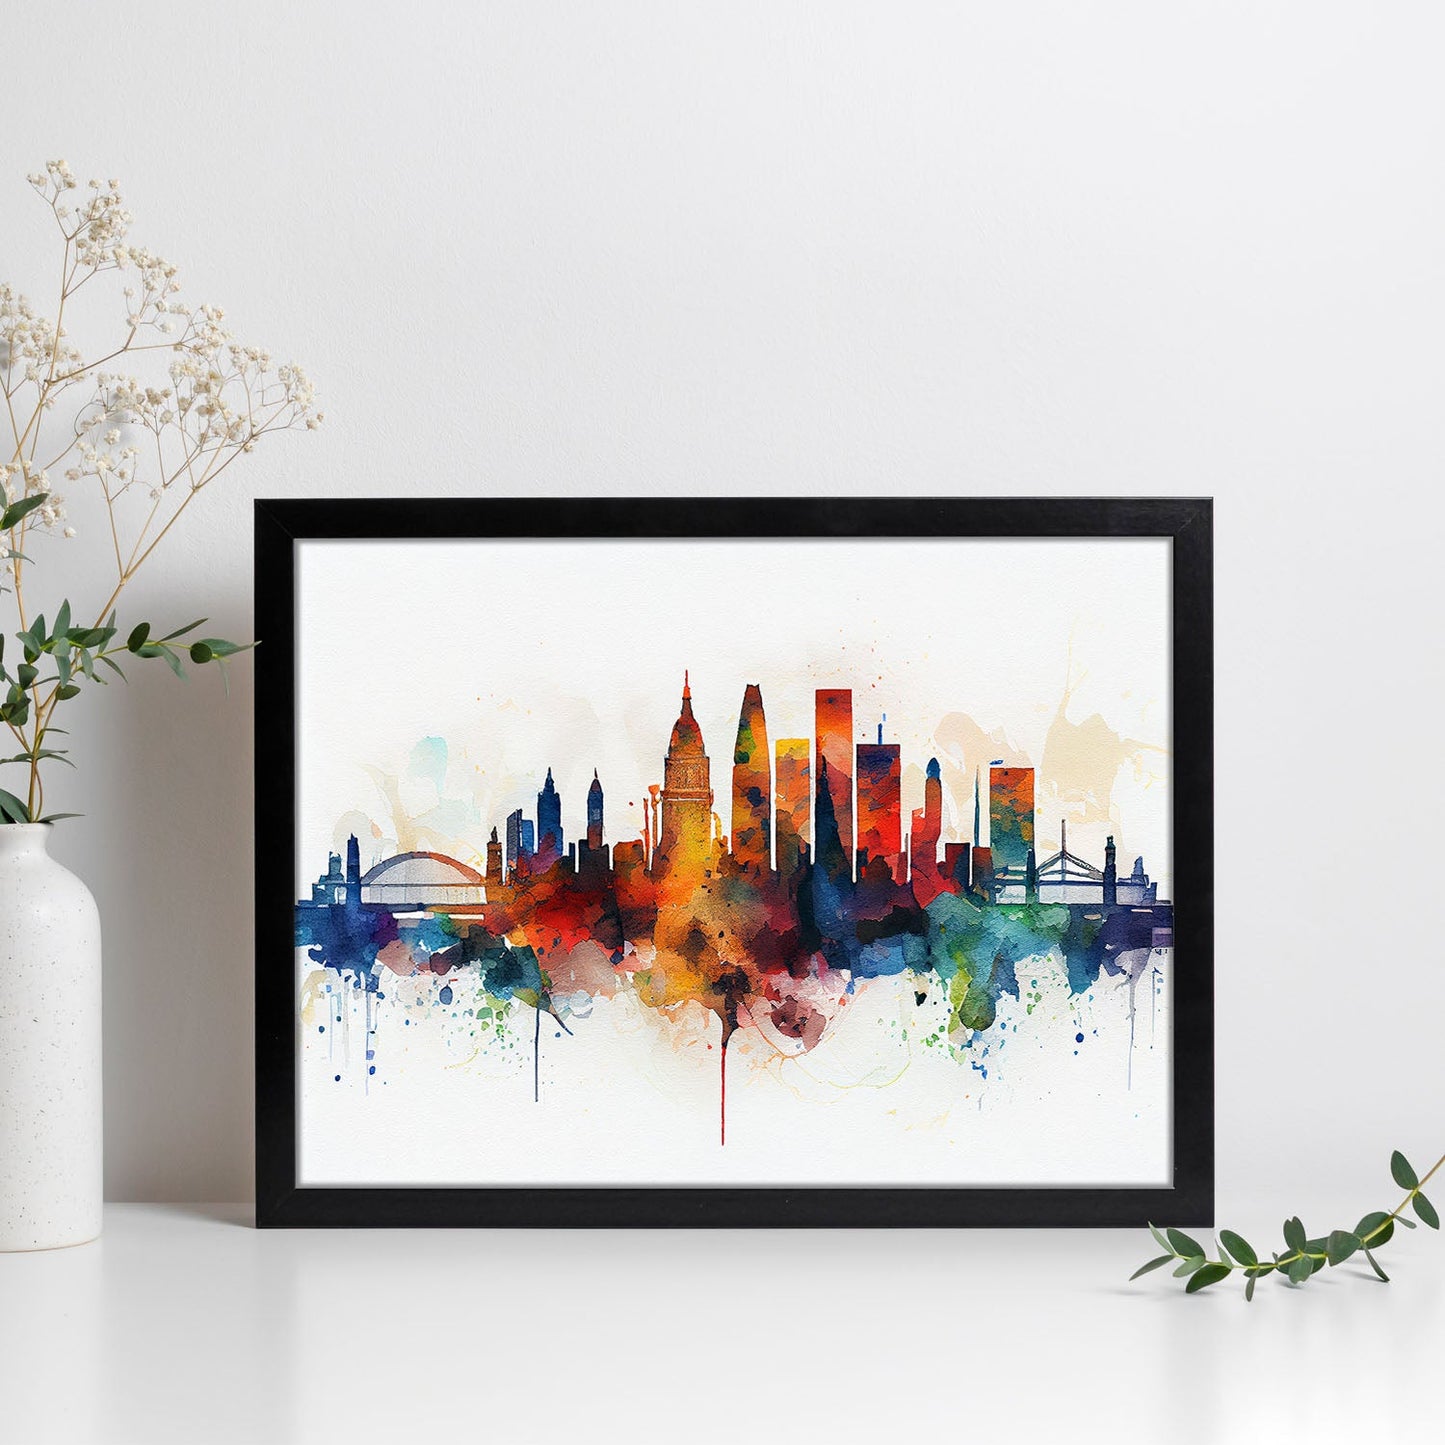 Nacnic watercolor of a skyline of the city of London_1. Aesthetic Wall Art Prints for Bedroom or Living Room Design.-Artwork-Nacnic-A4-Sin Marco-Nacnic Estudio SL